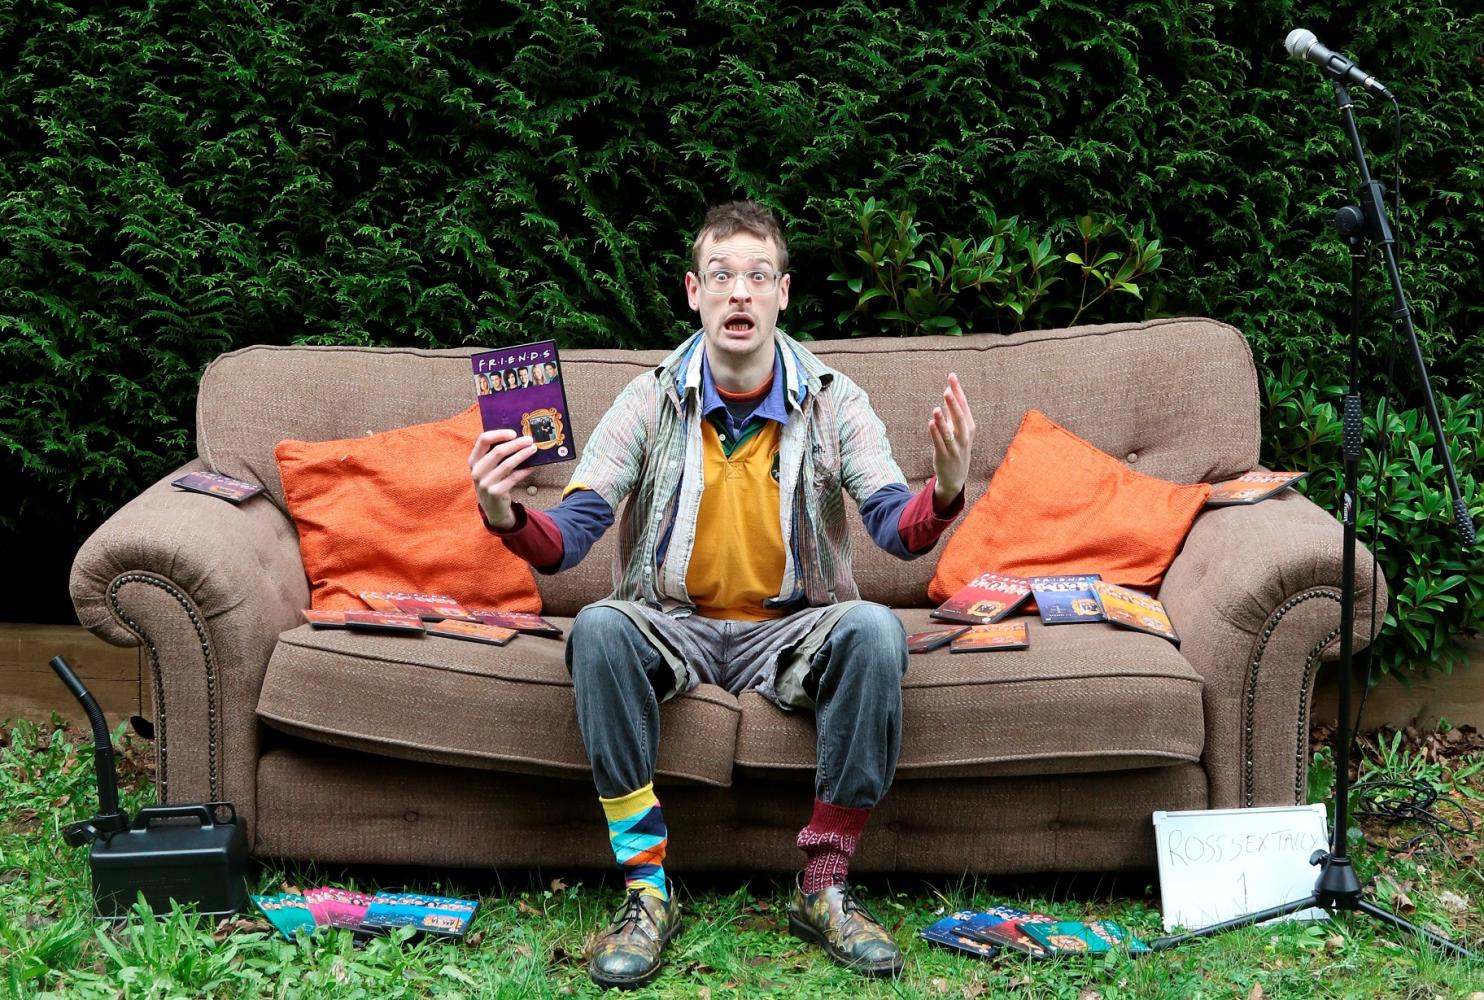 Dylan Dodds sits on a sofa in front of a hedge. He is surrounded by Friends DVD's and doesn't look happy